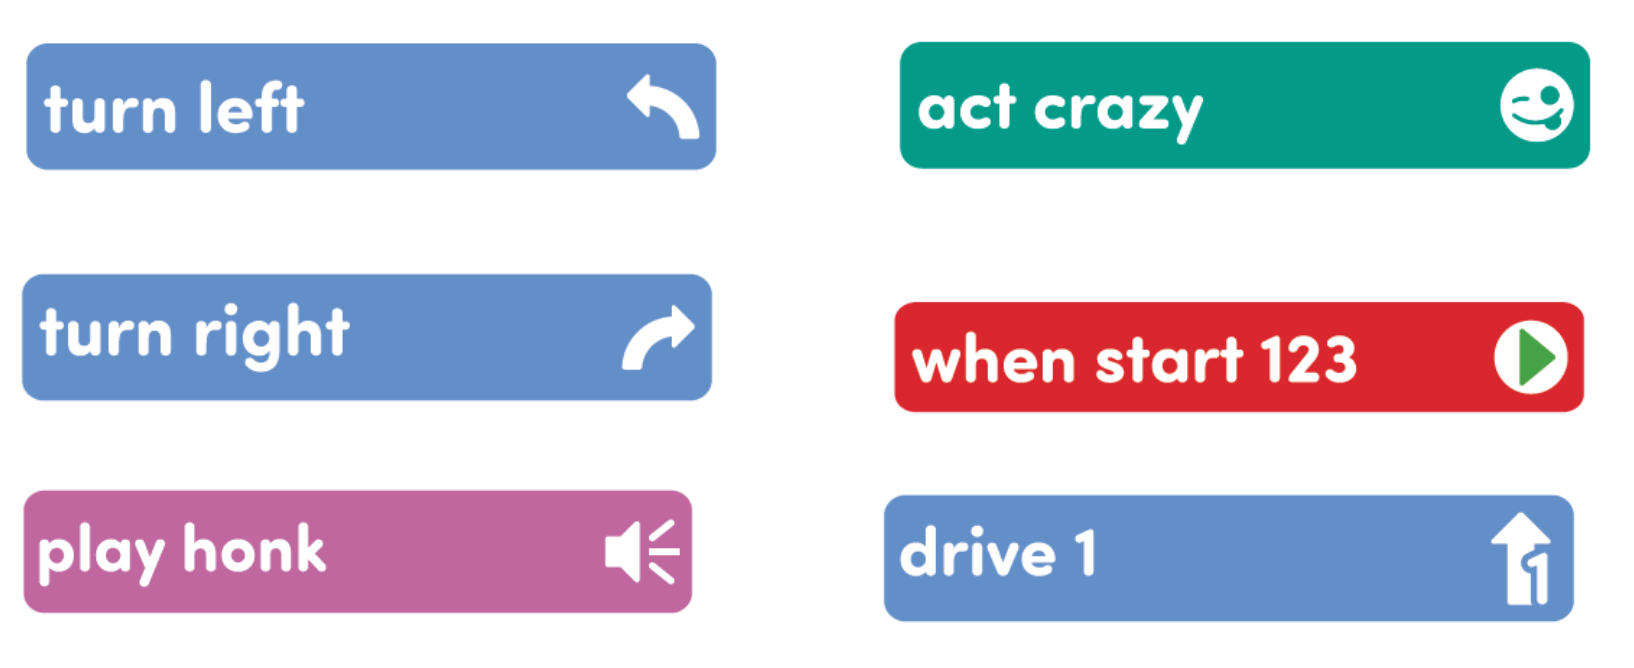 image of the following coder cards: Turn left, Turn right, Play honk, Act crazy, When start 123, Drive 1